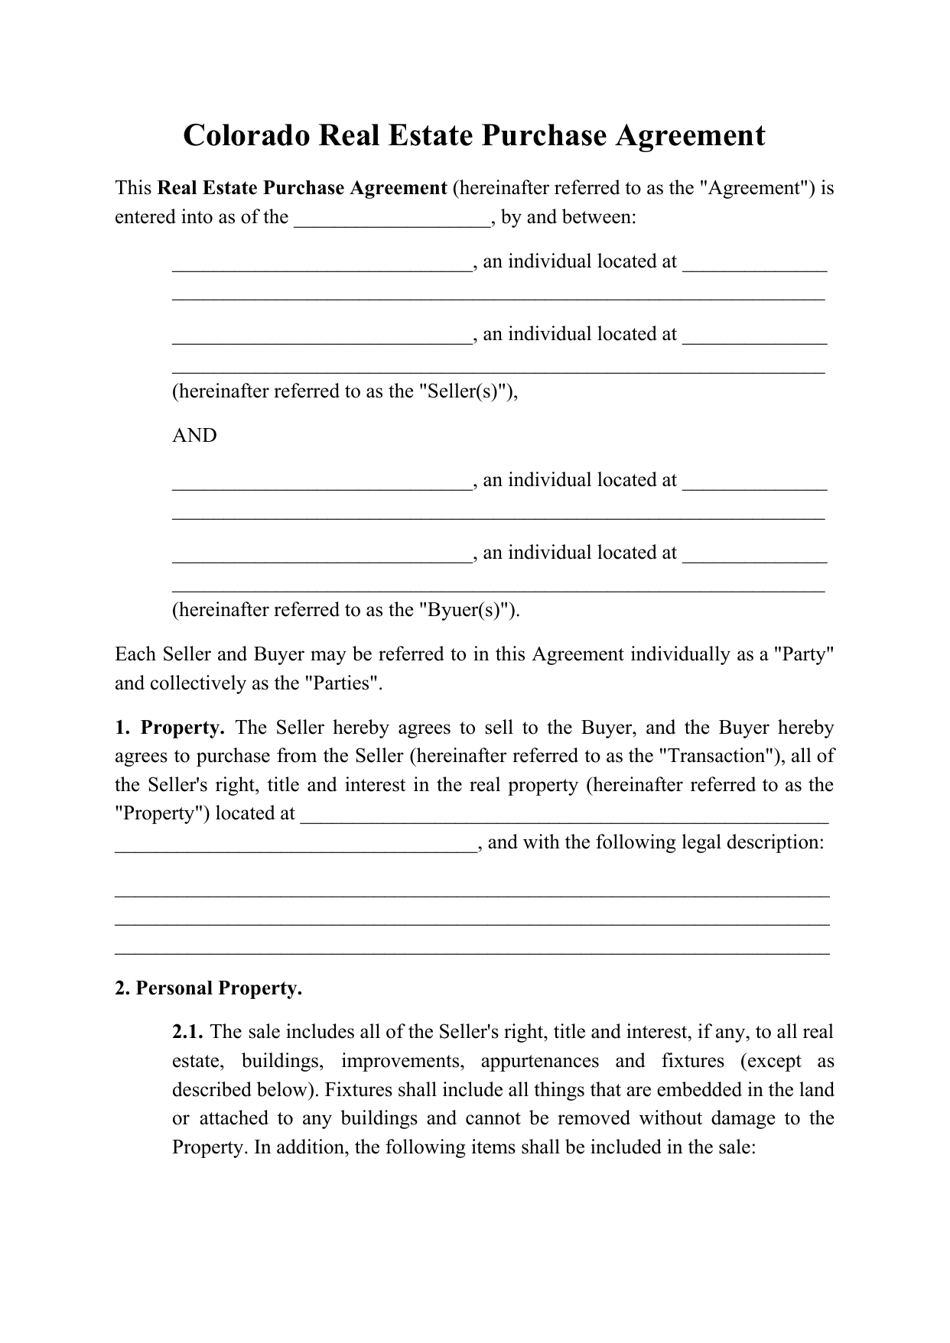 Colorado Real Estate Purchase Agreement Template Fill Out, Sign